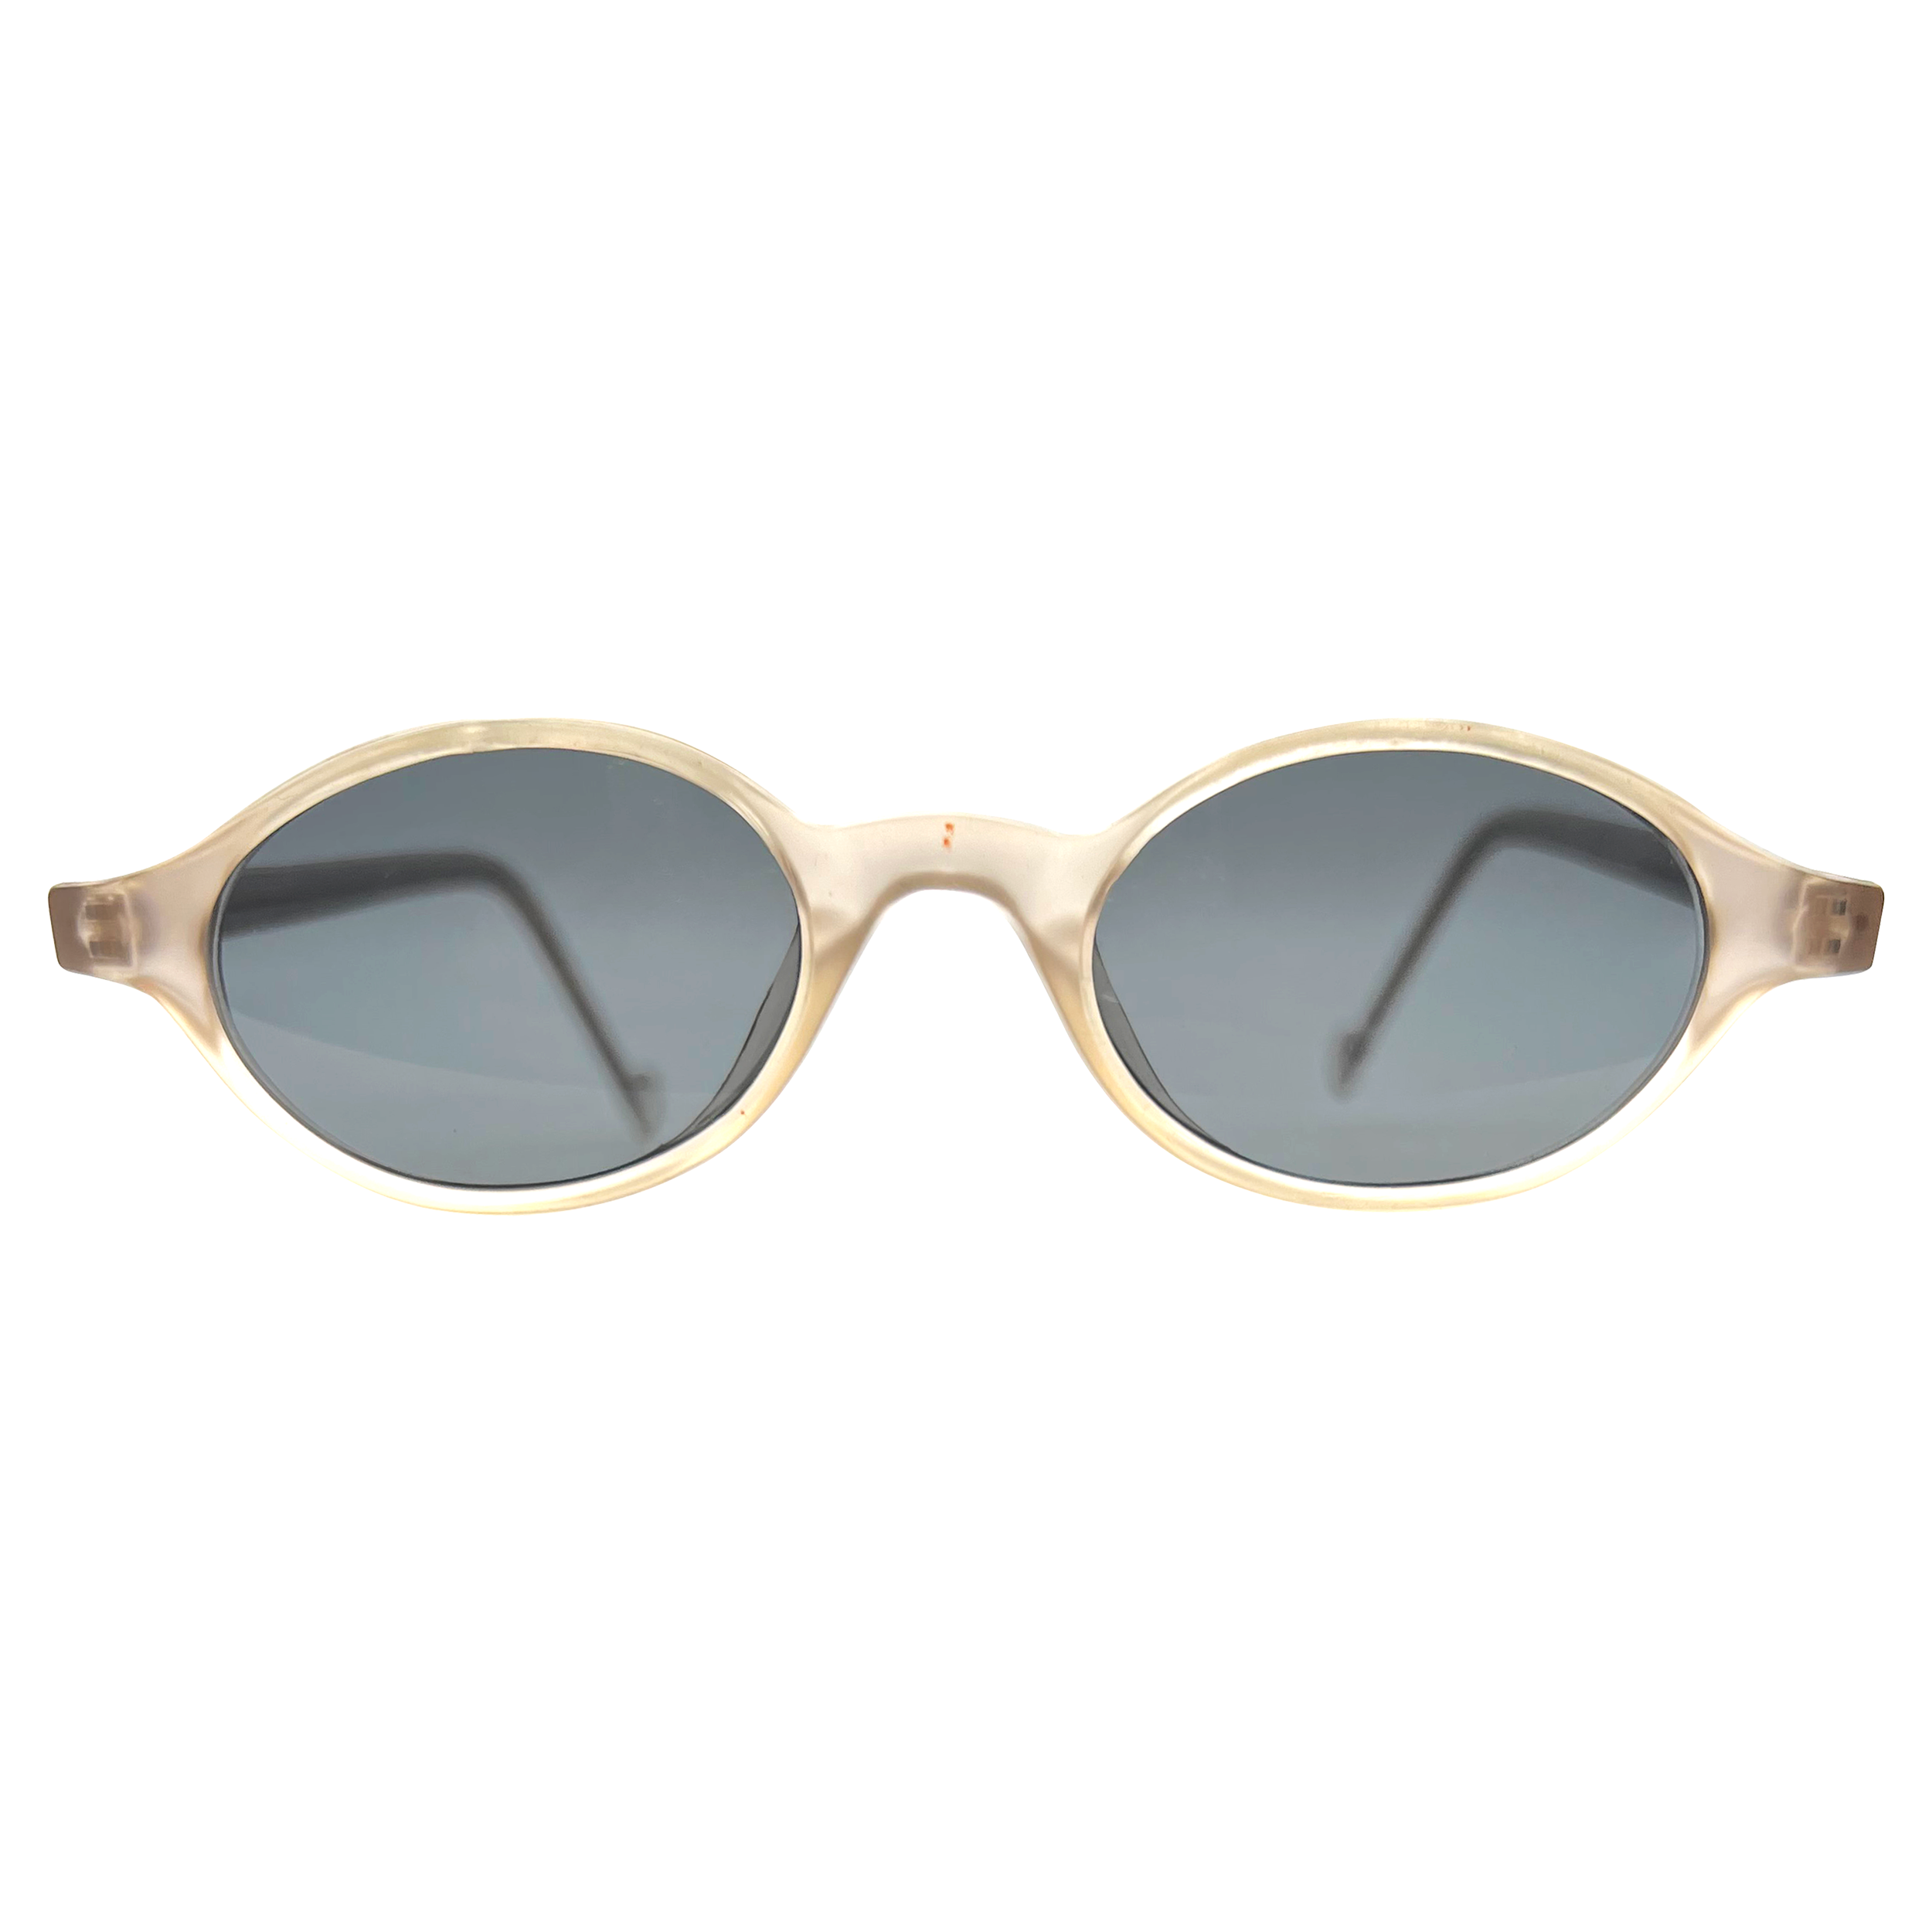 Summer must-haves: Oval sunglasses | Specsavers IE